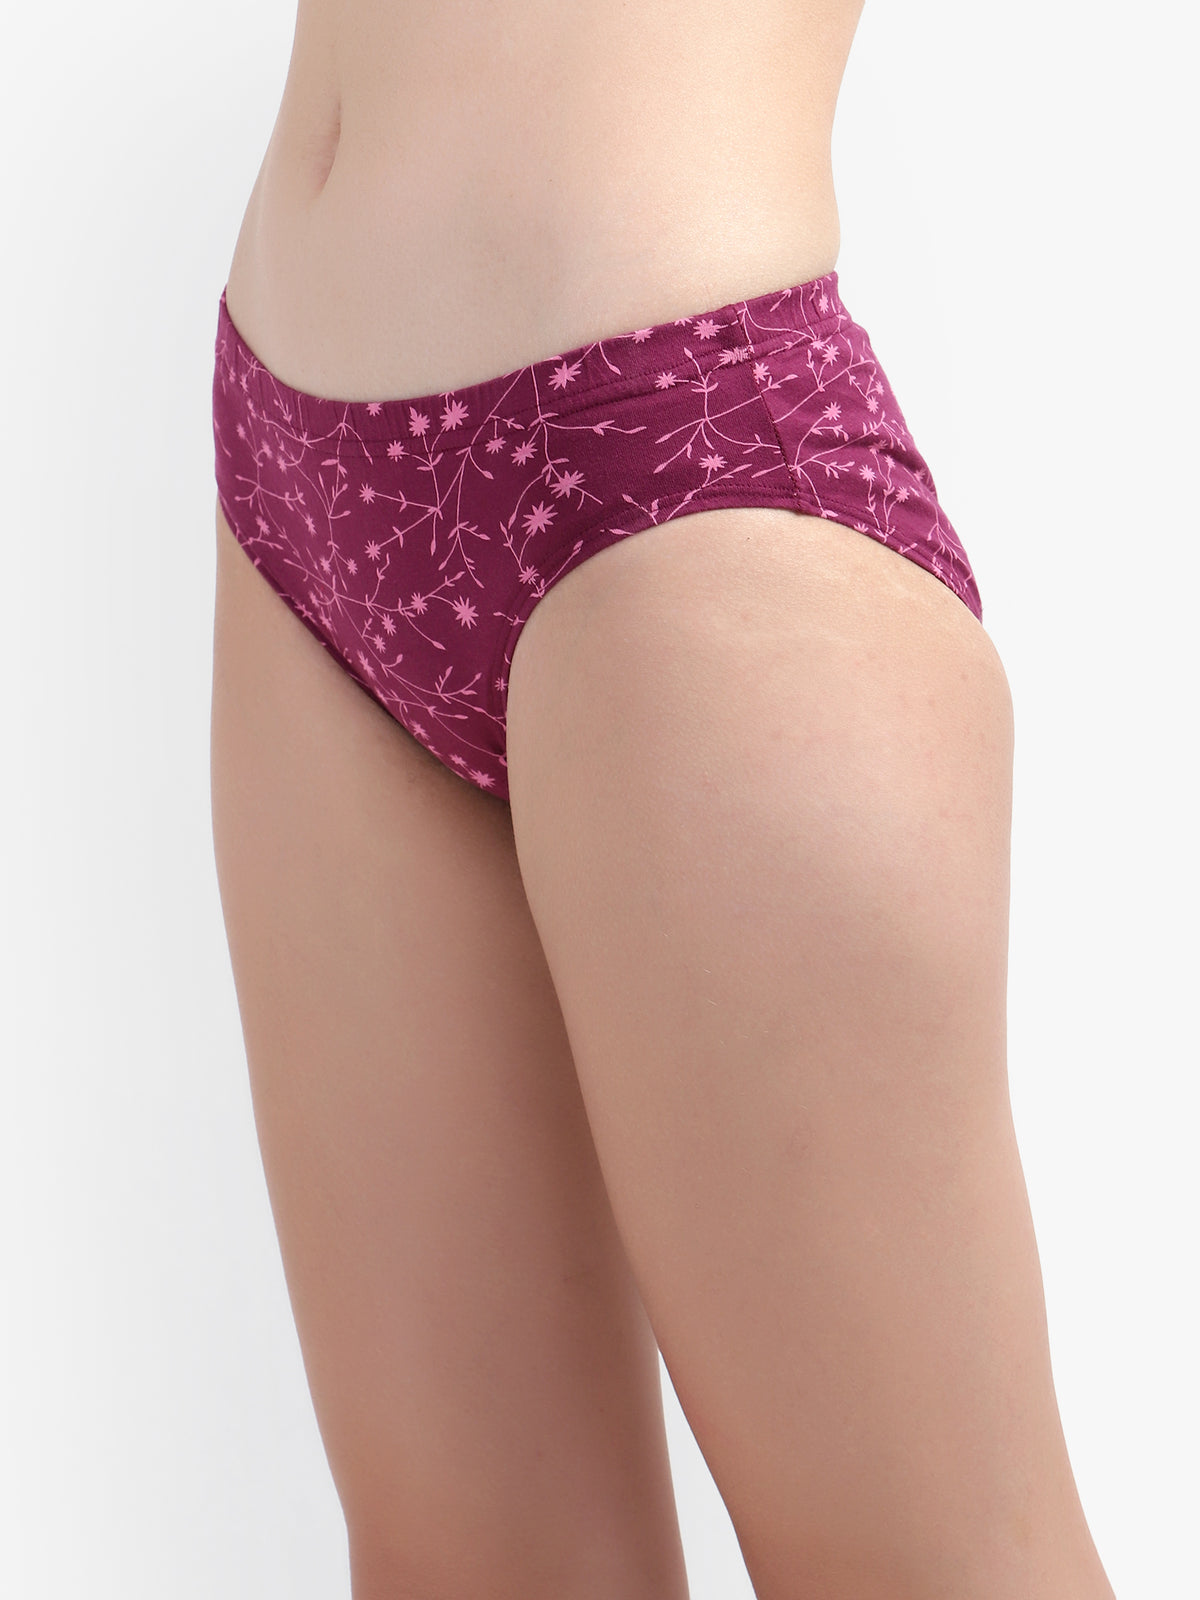 Assorted Printed Wine Cotton Women Panty